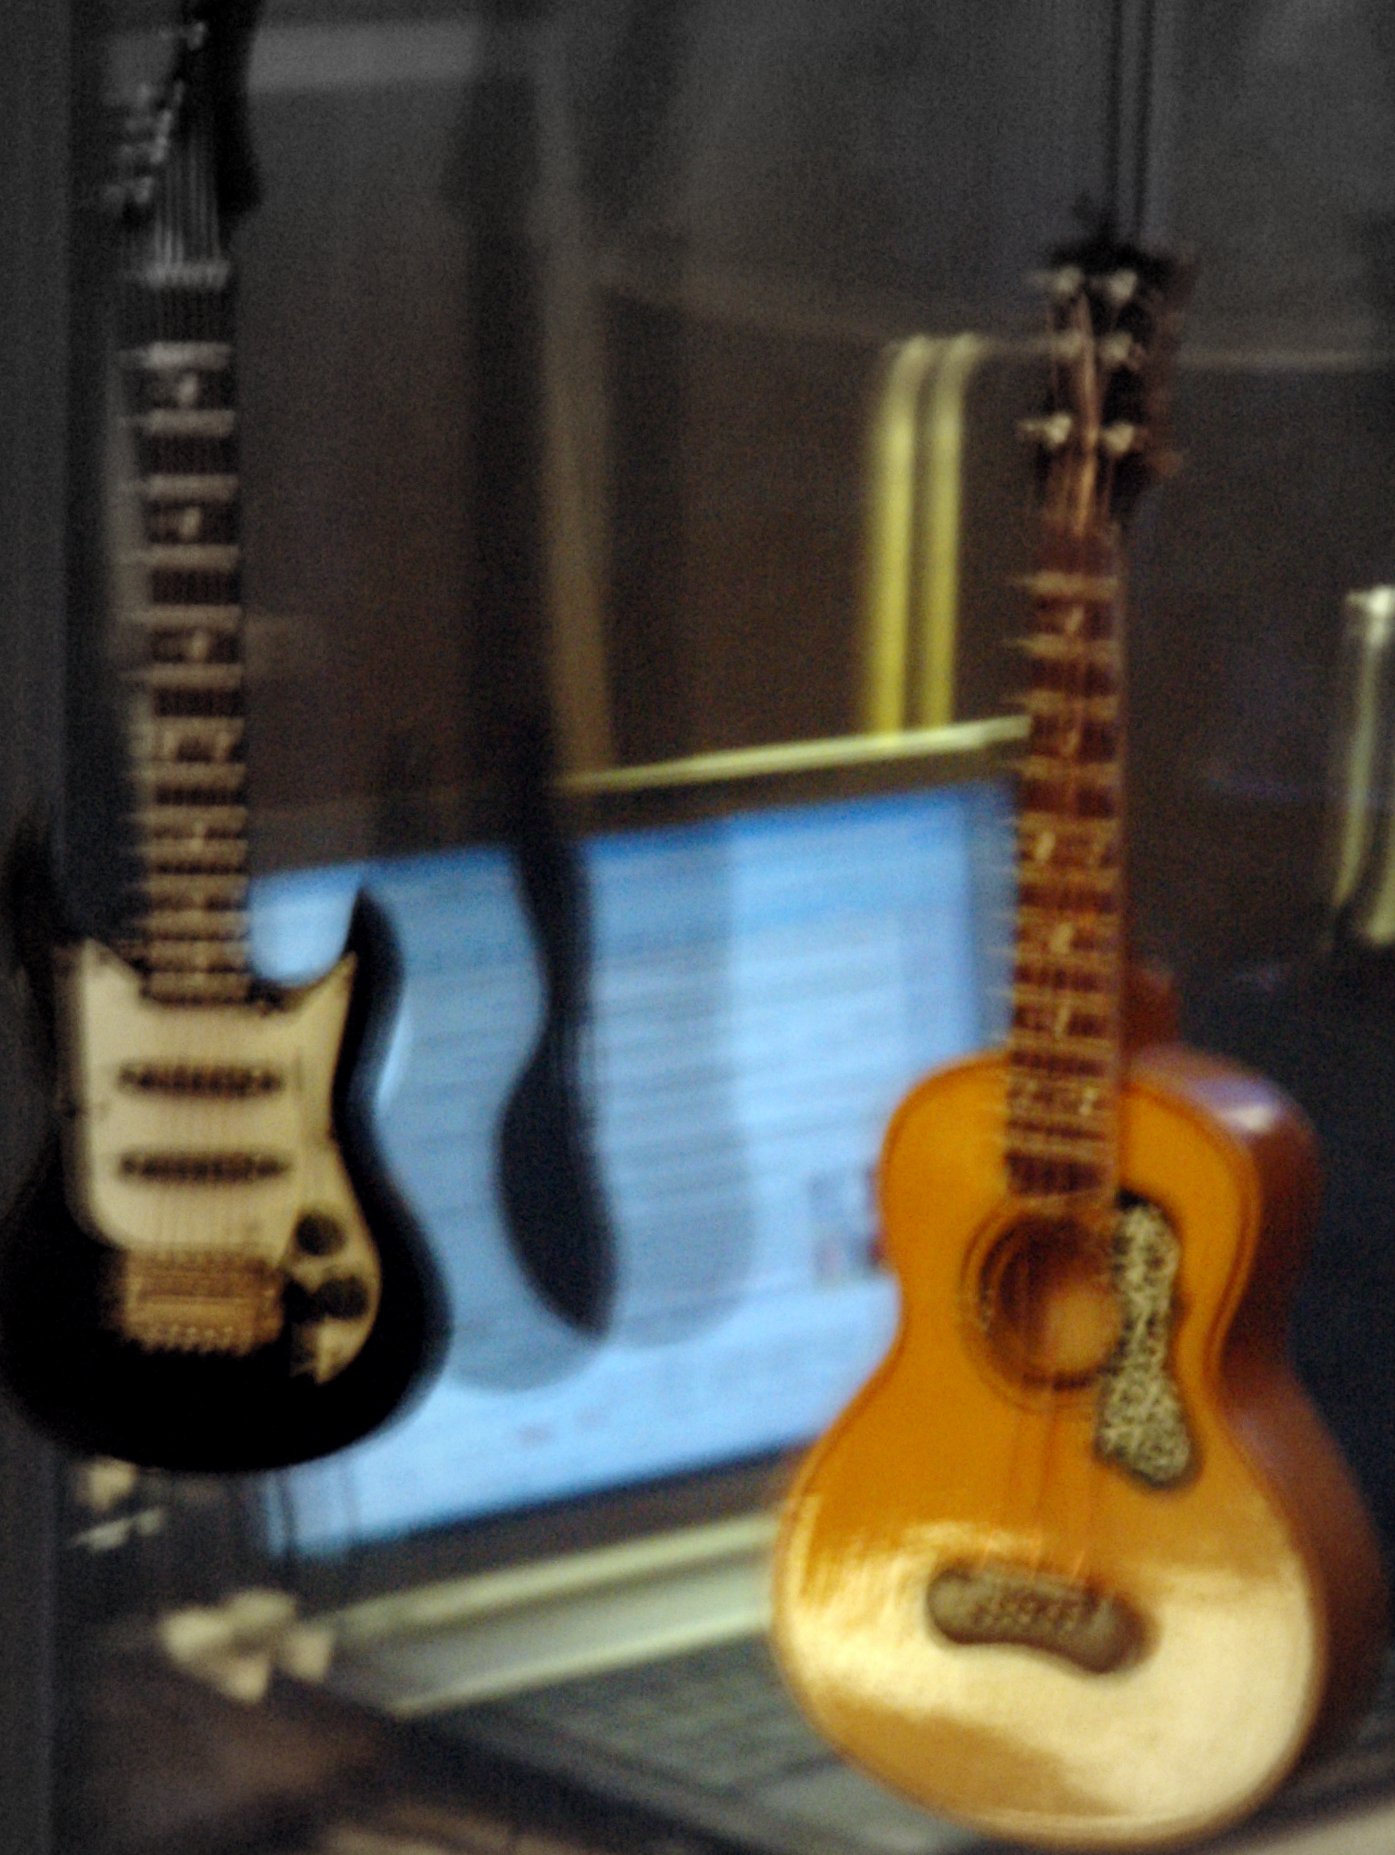 two guitars are next to each other in front of a monitor